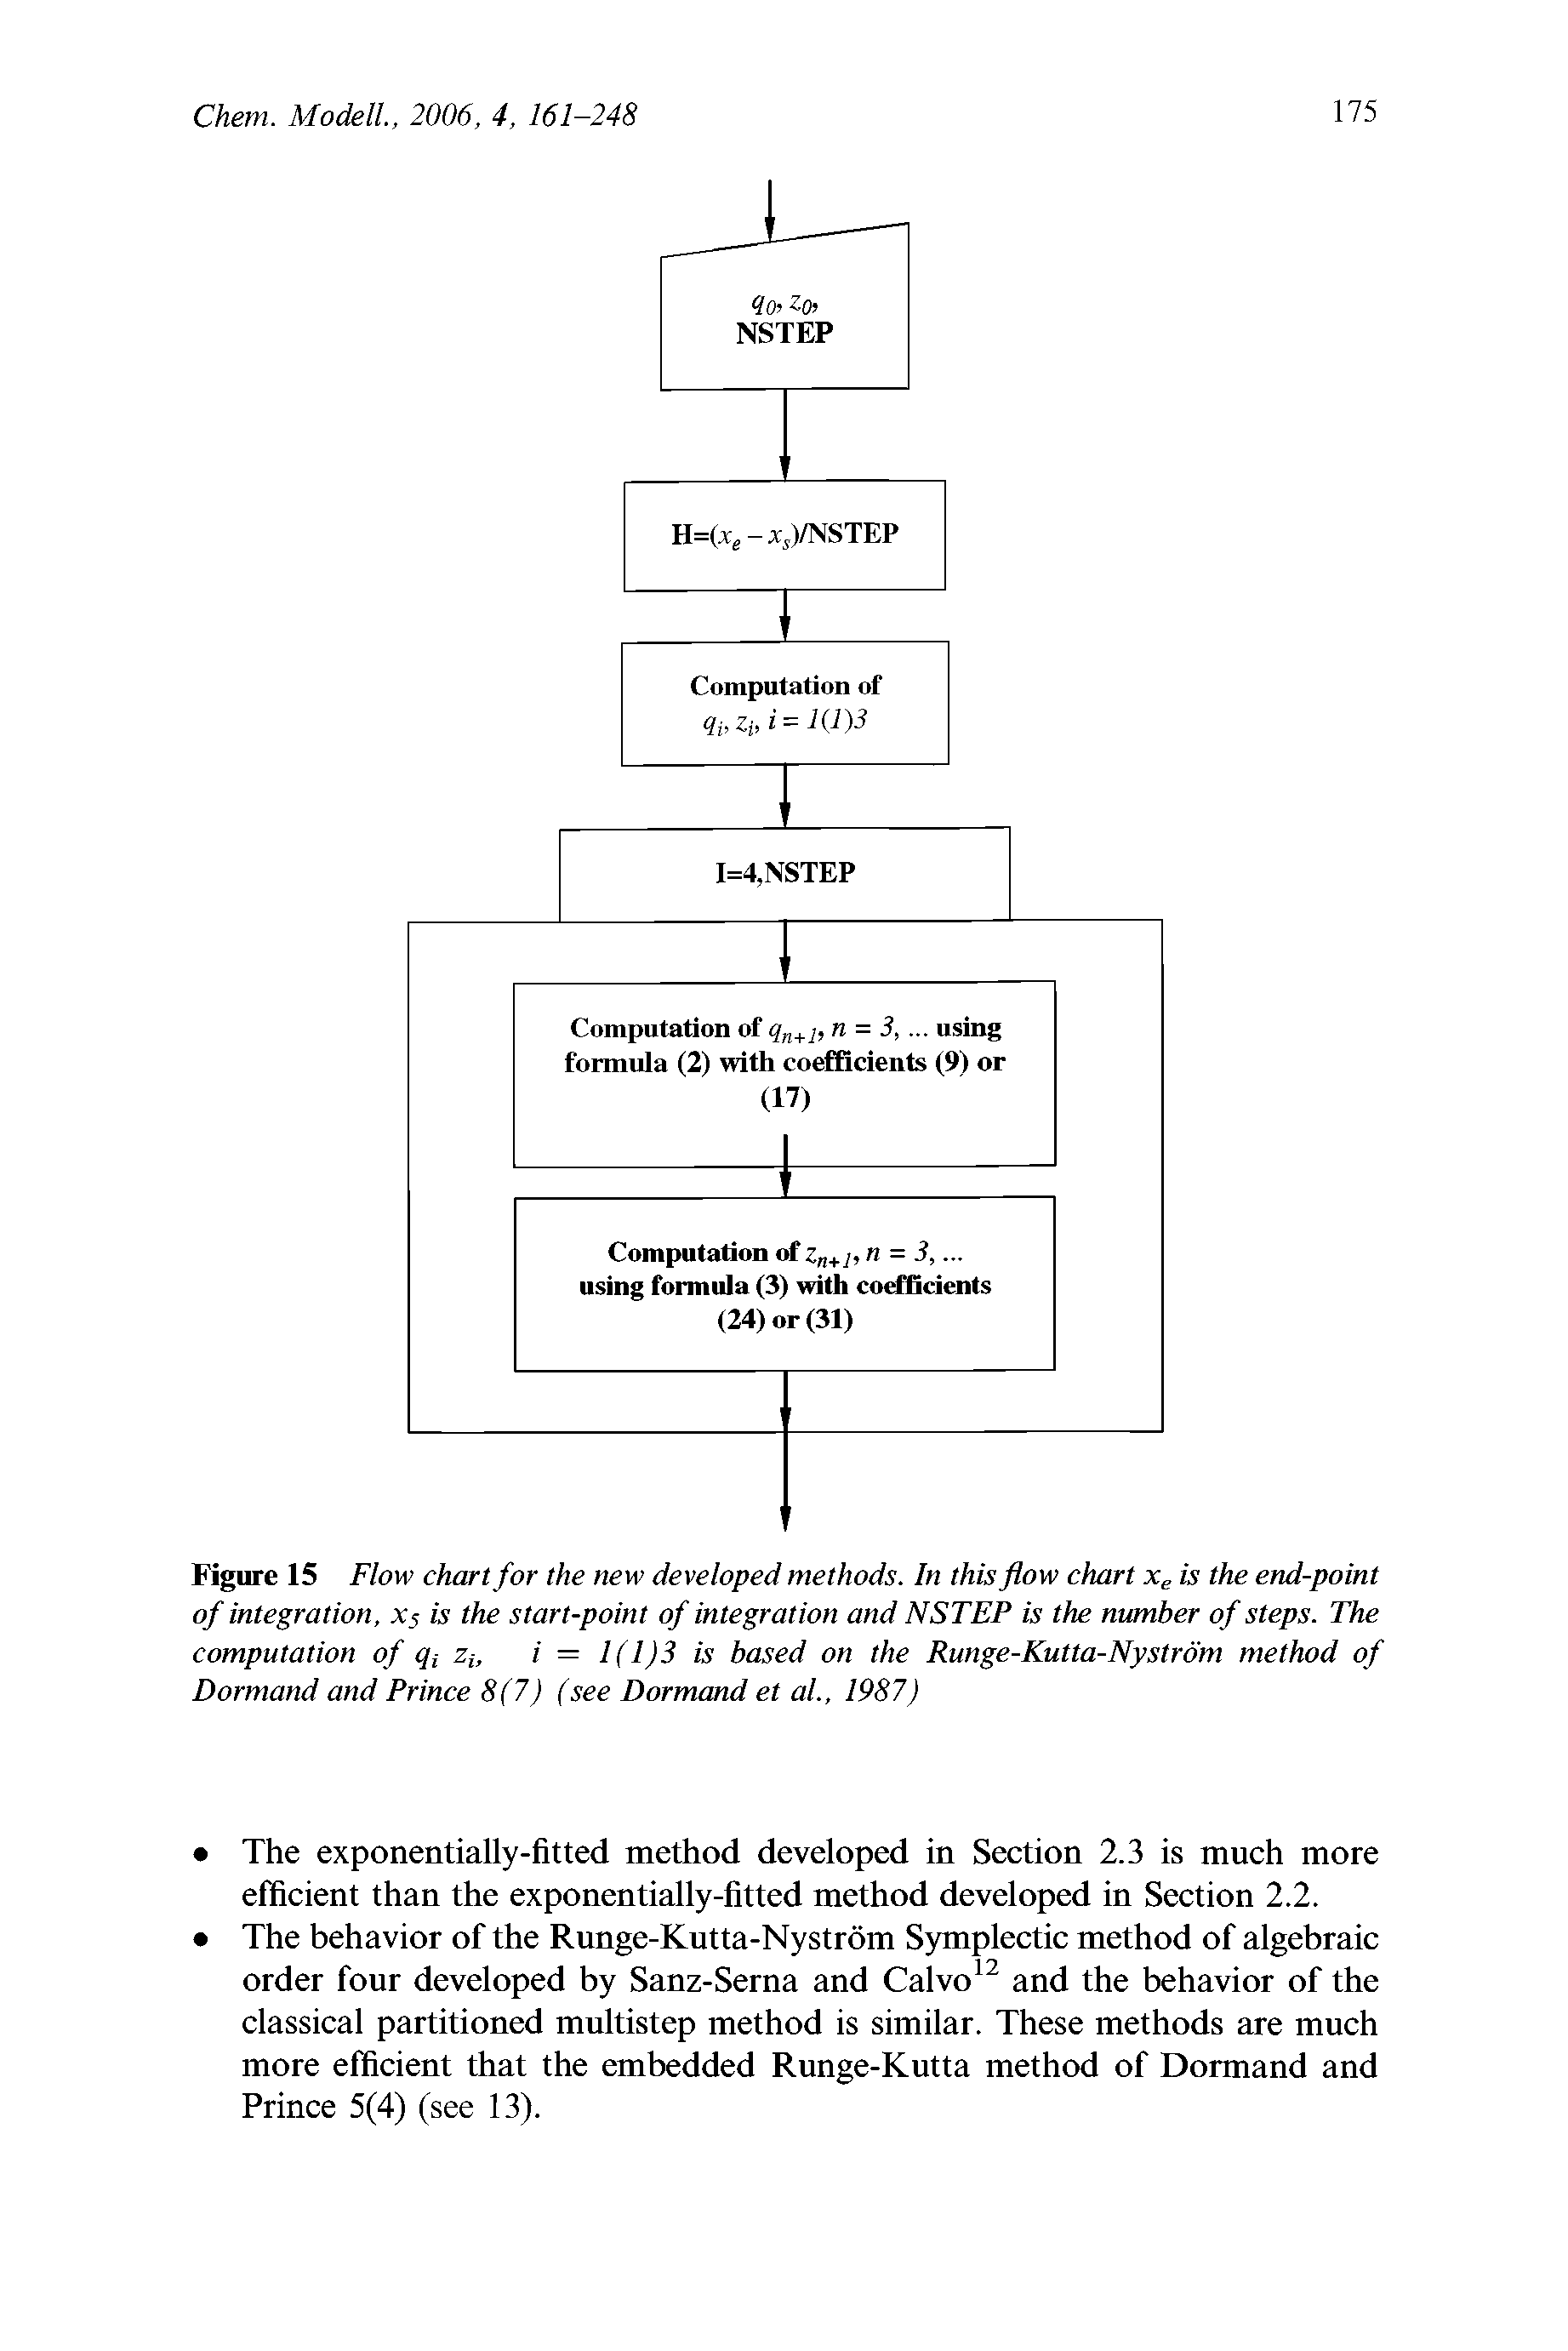 Figure 15 Flow chart for the new developed methods. In this flow chart x,. is the end-point of integration, x5 is the start-point of integration and NSTEP is the number of steps. The computation of q, z i = 1(1)3 is based on the Runge-Kutta-Nystrom method of Dormand and Prince 8(7) (see Dormand et al., 1987)...